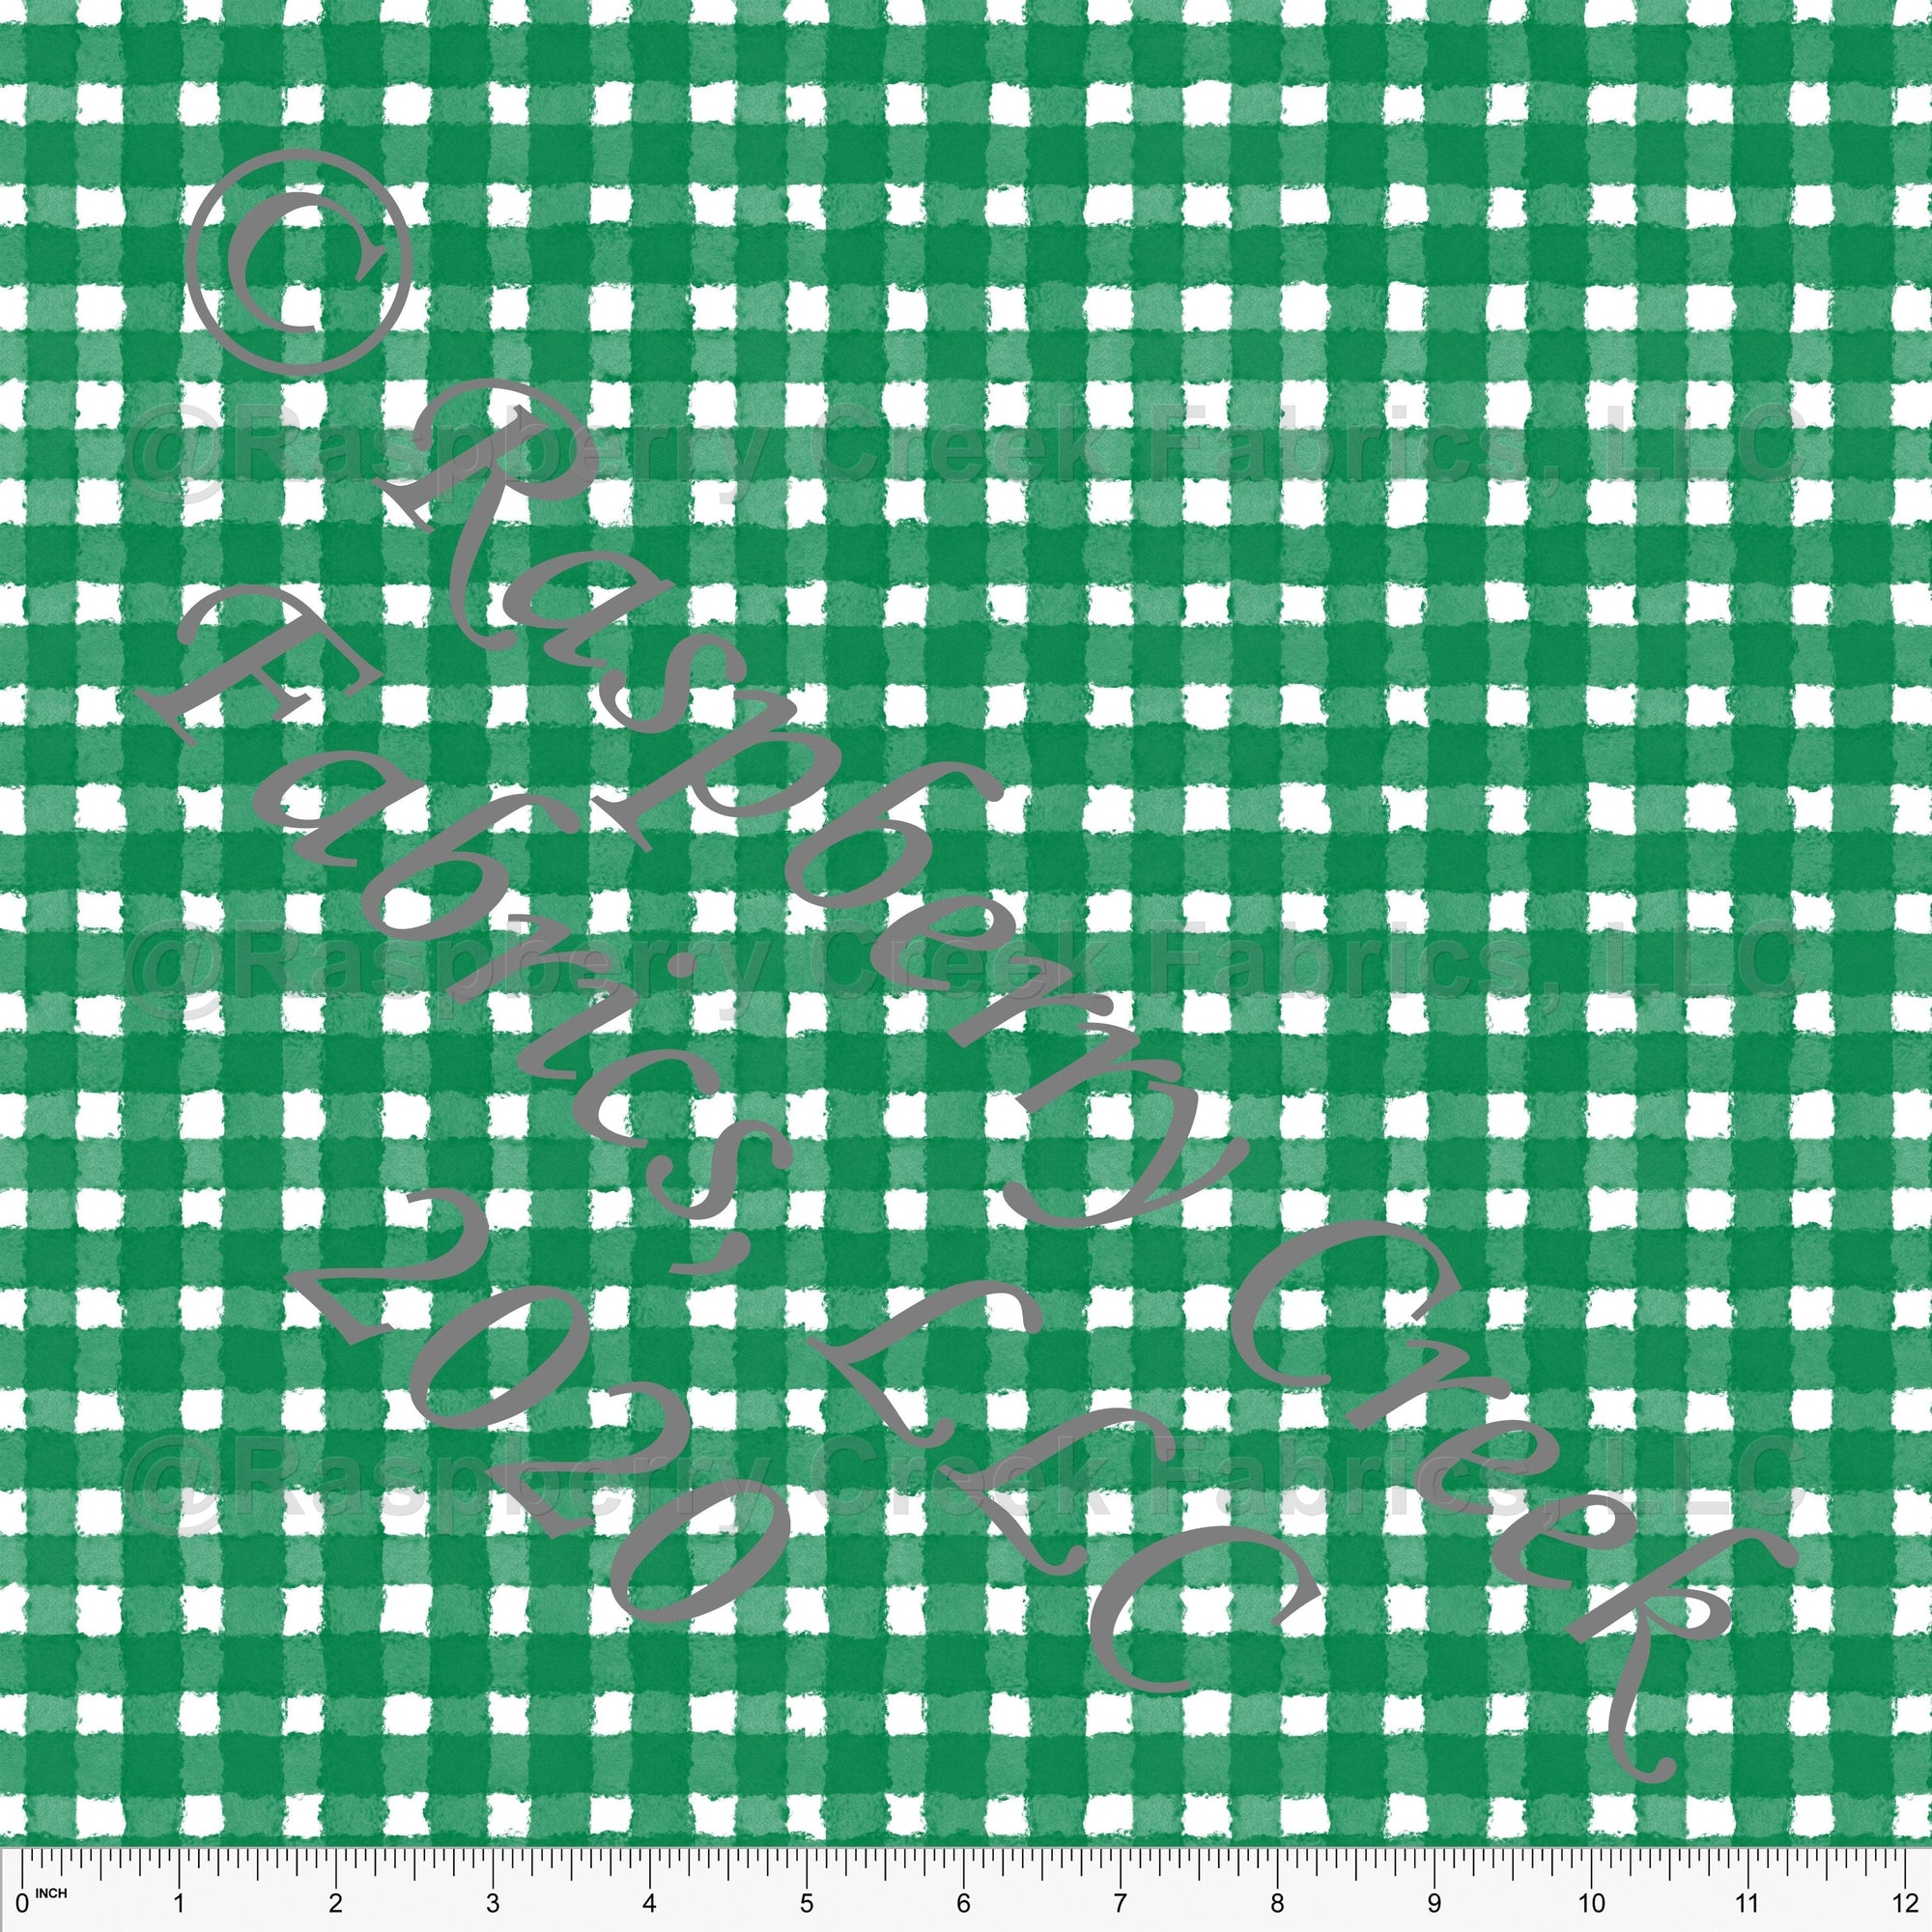 Green and White Painted Check Gingham, By Bri Powell for Club Fabrics Fabric, Raspberry Creek Fabrics, watermarked